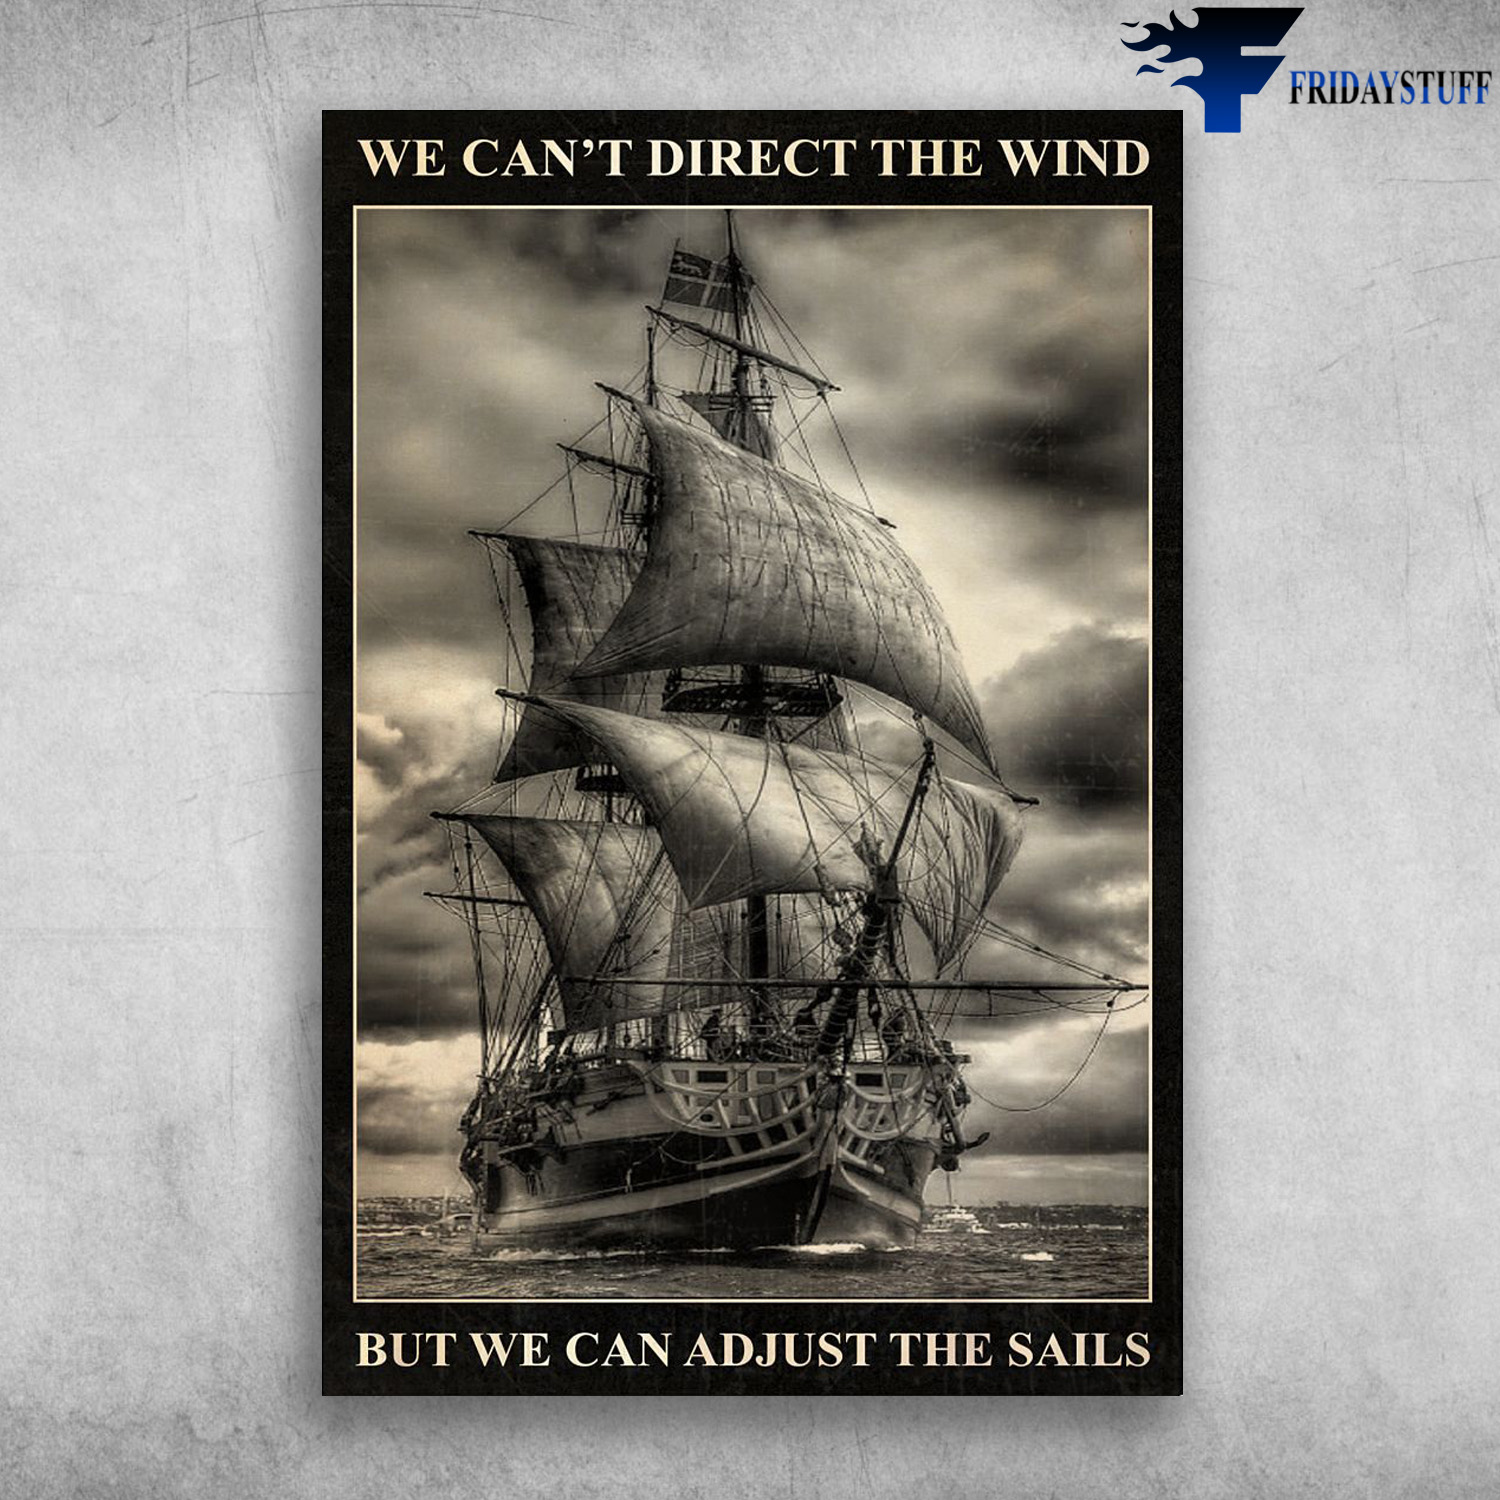 The Sailboat - We Can't Direct The Wind, But We Can Adjust The Sails